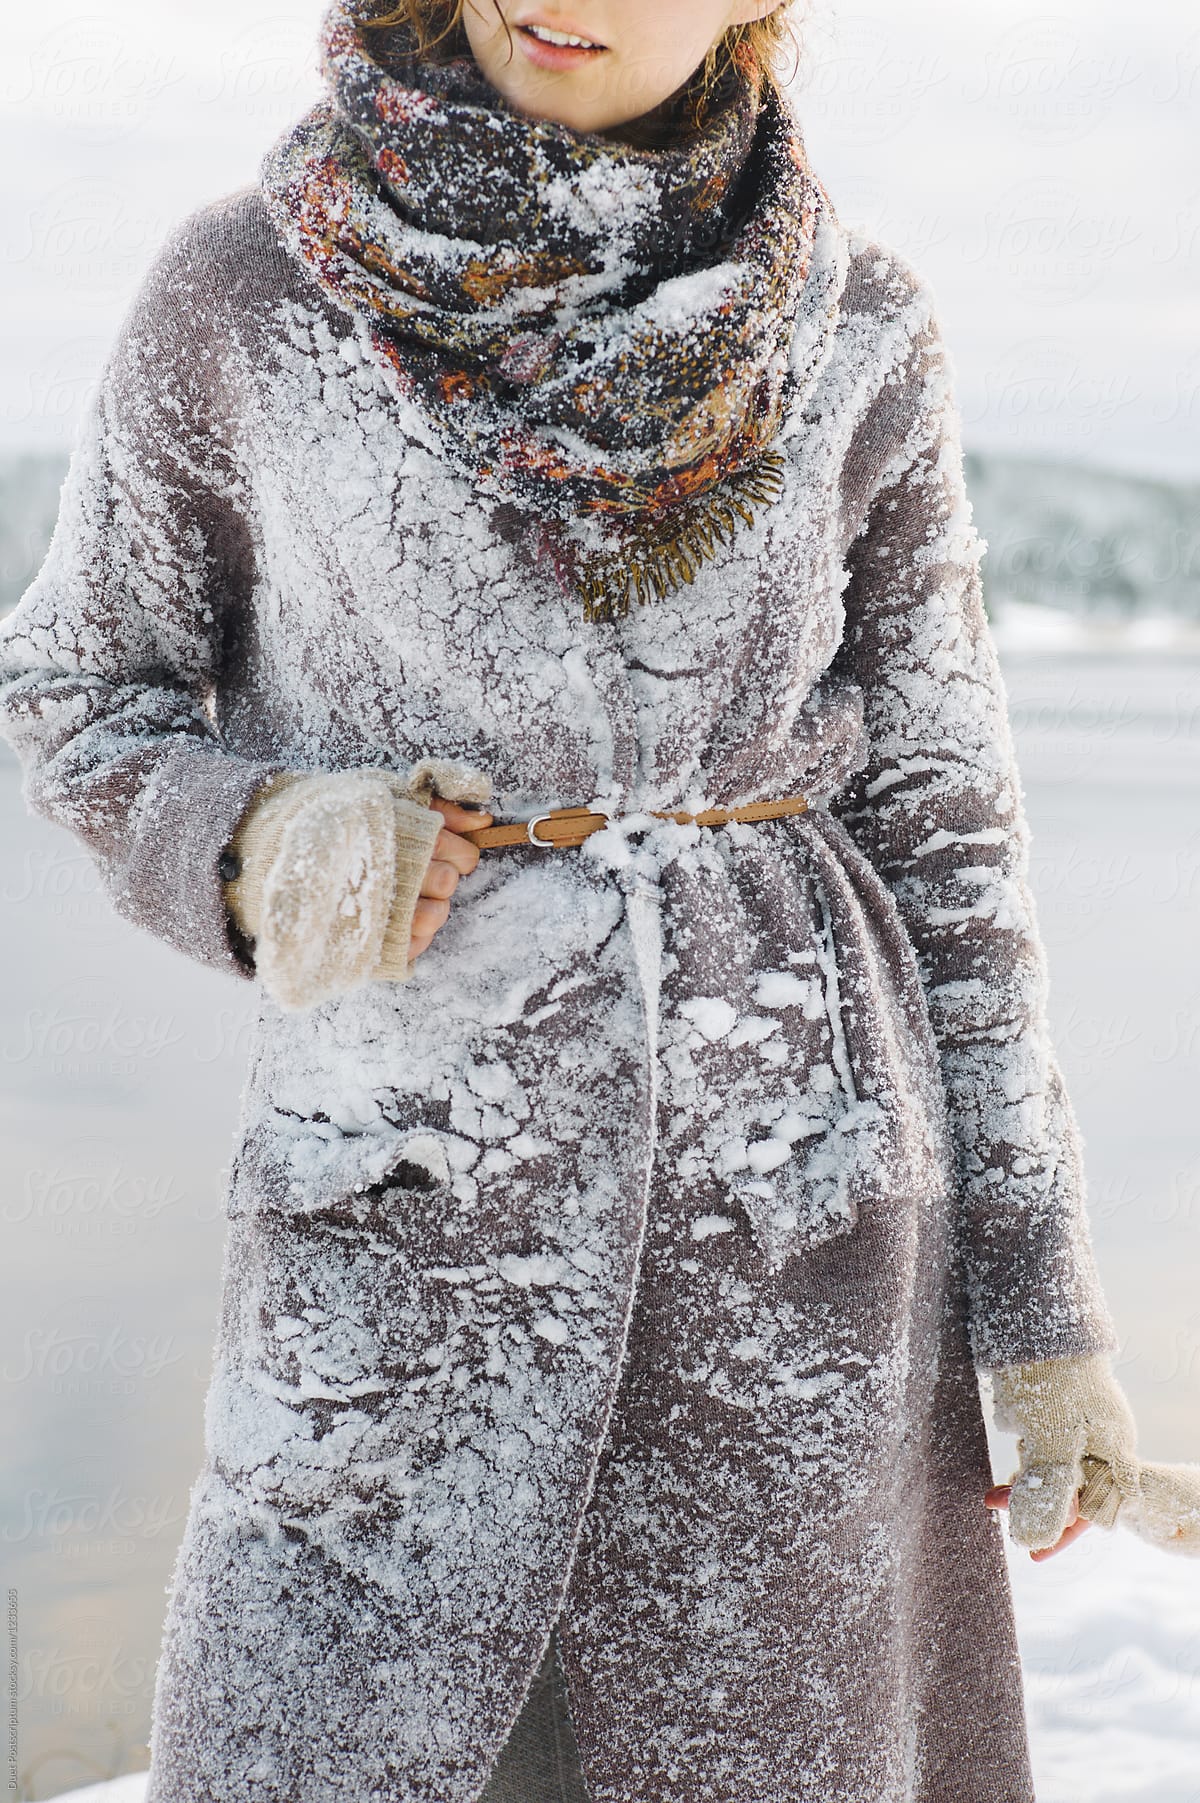 Crop female in coat covered with snow